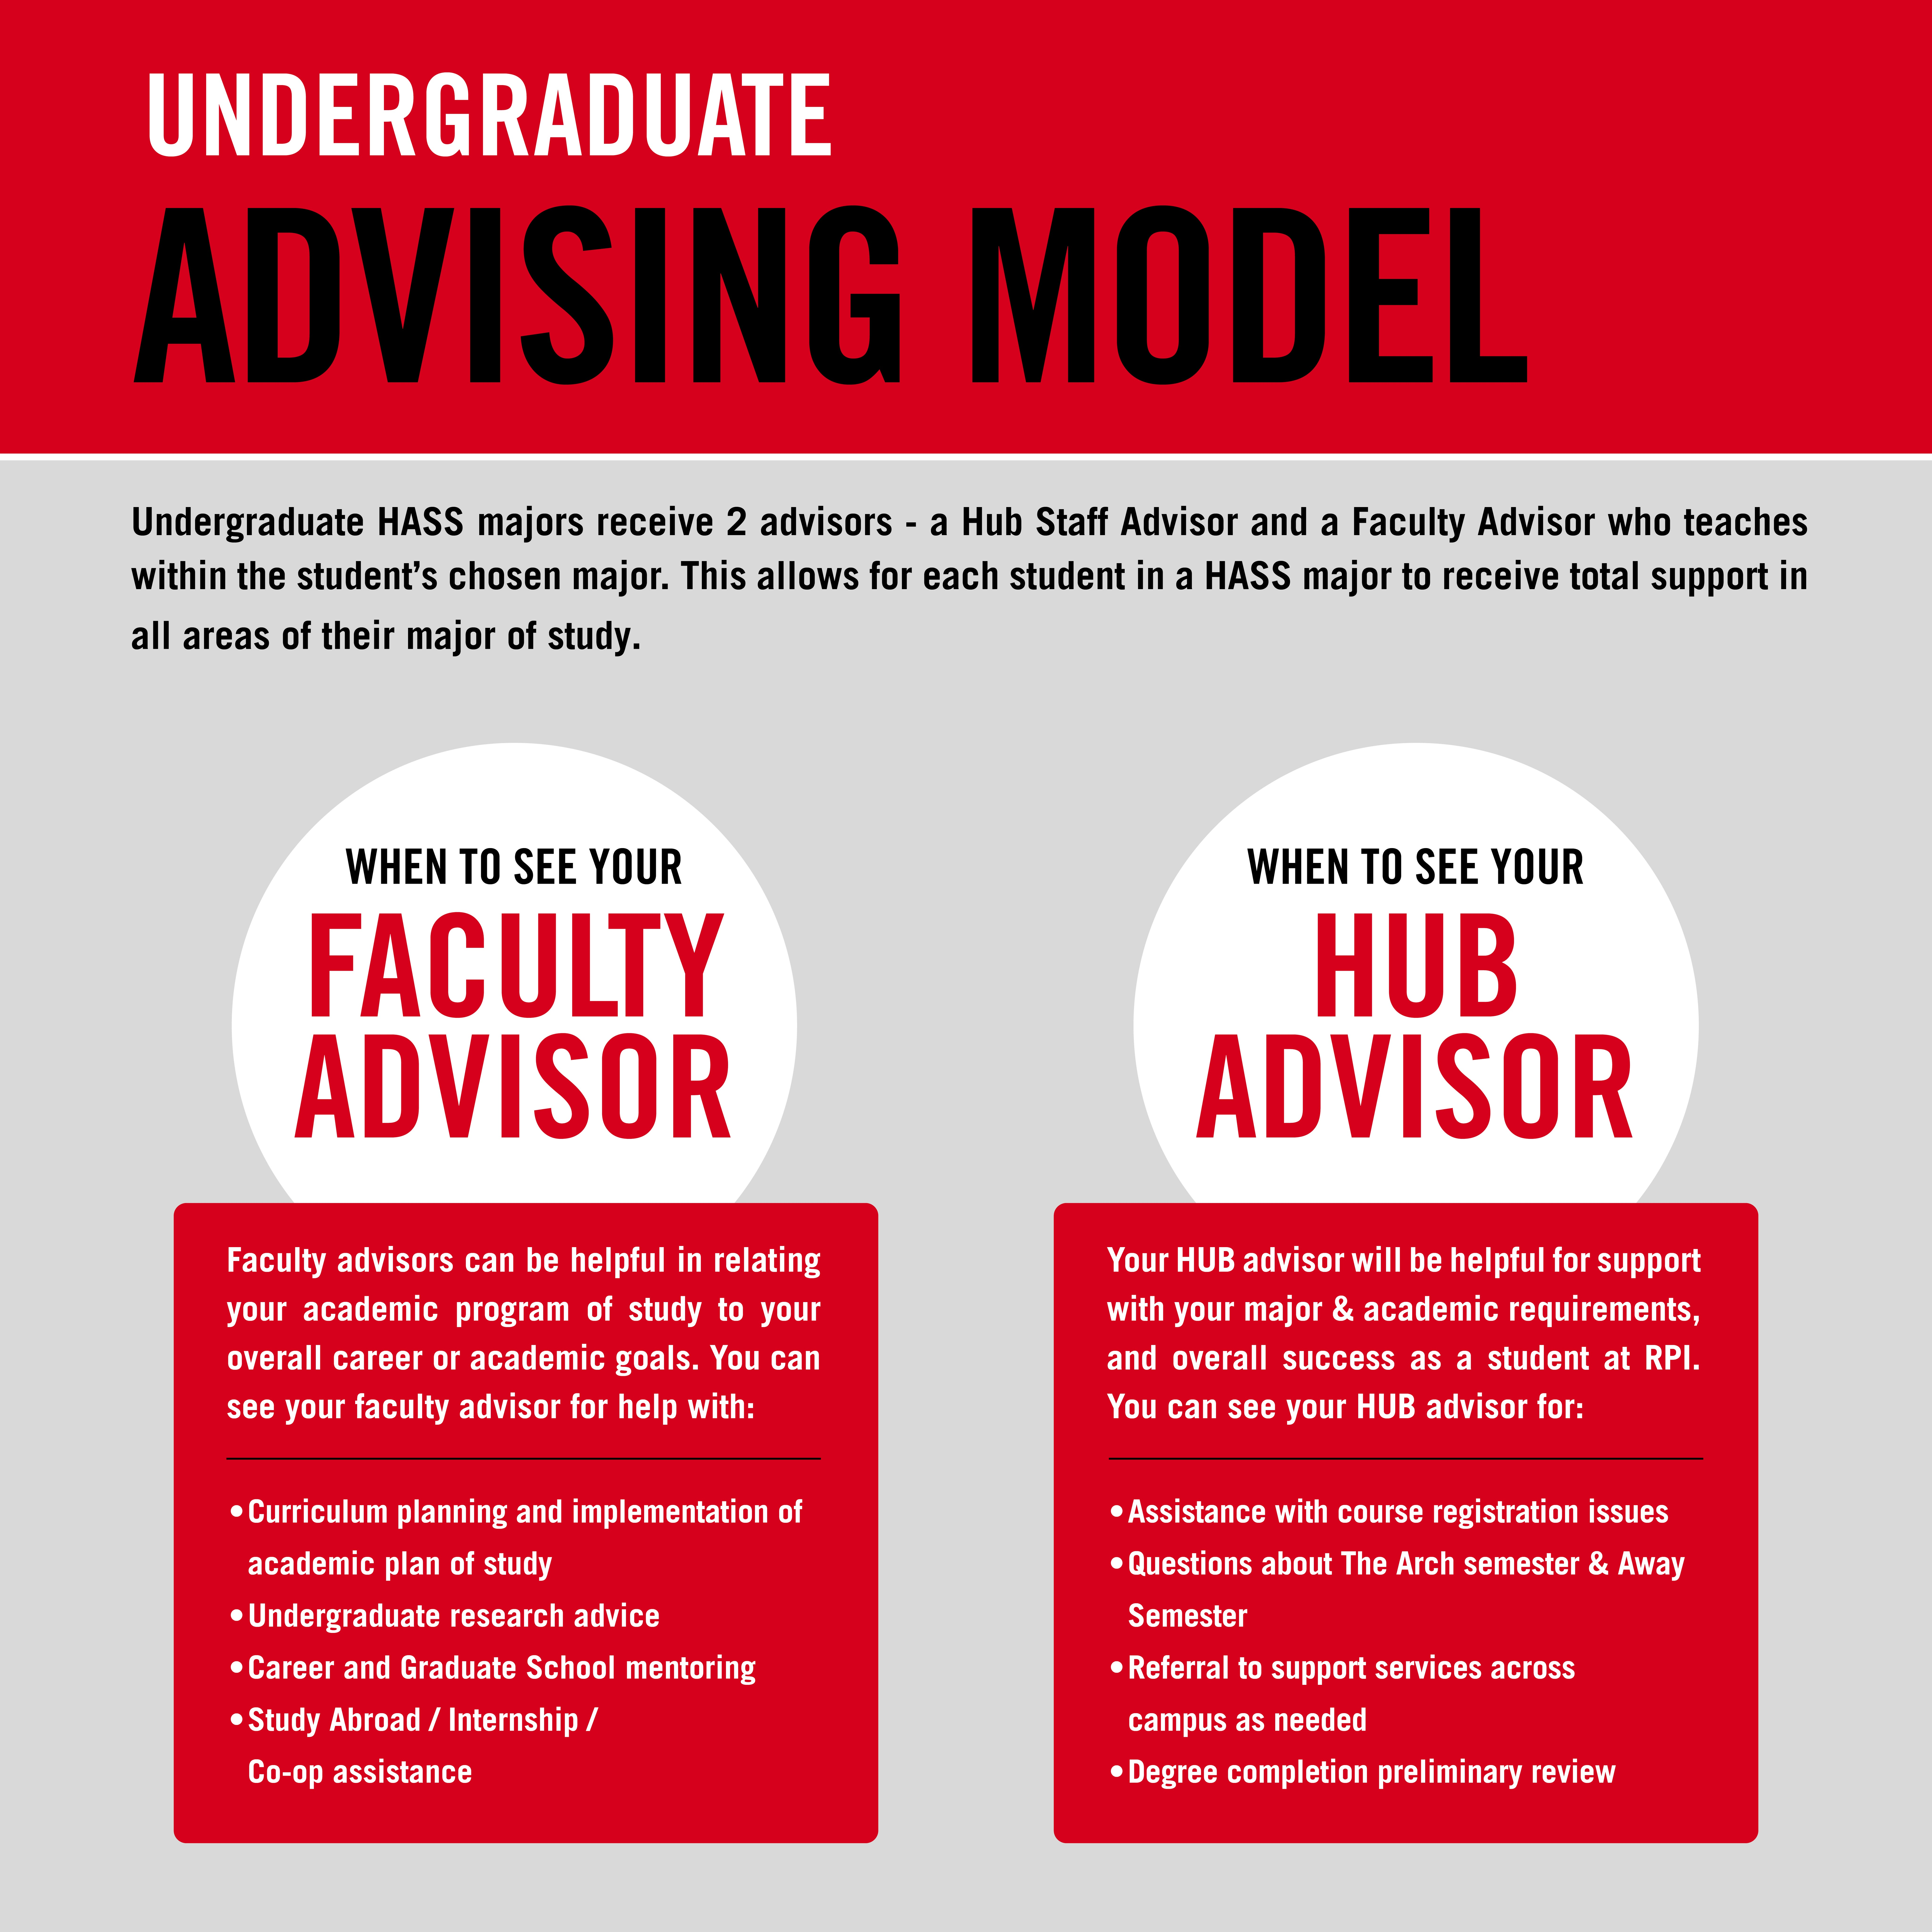 Undergraduate Advising Model: Undergraduate HASS majors receive 2 advisors - a Hub Staff Advisor and a Faculty Advisor who teaches within the student’s chosen major. This allows for each student in a HASS major to receive total support in all areas of their major of study. 